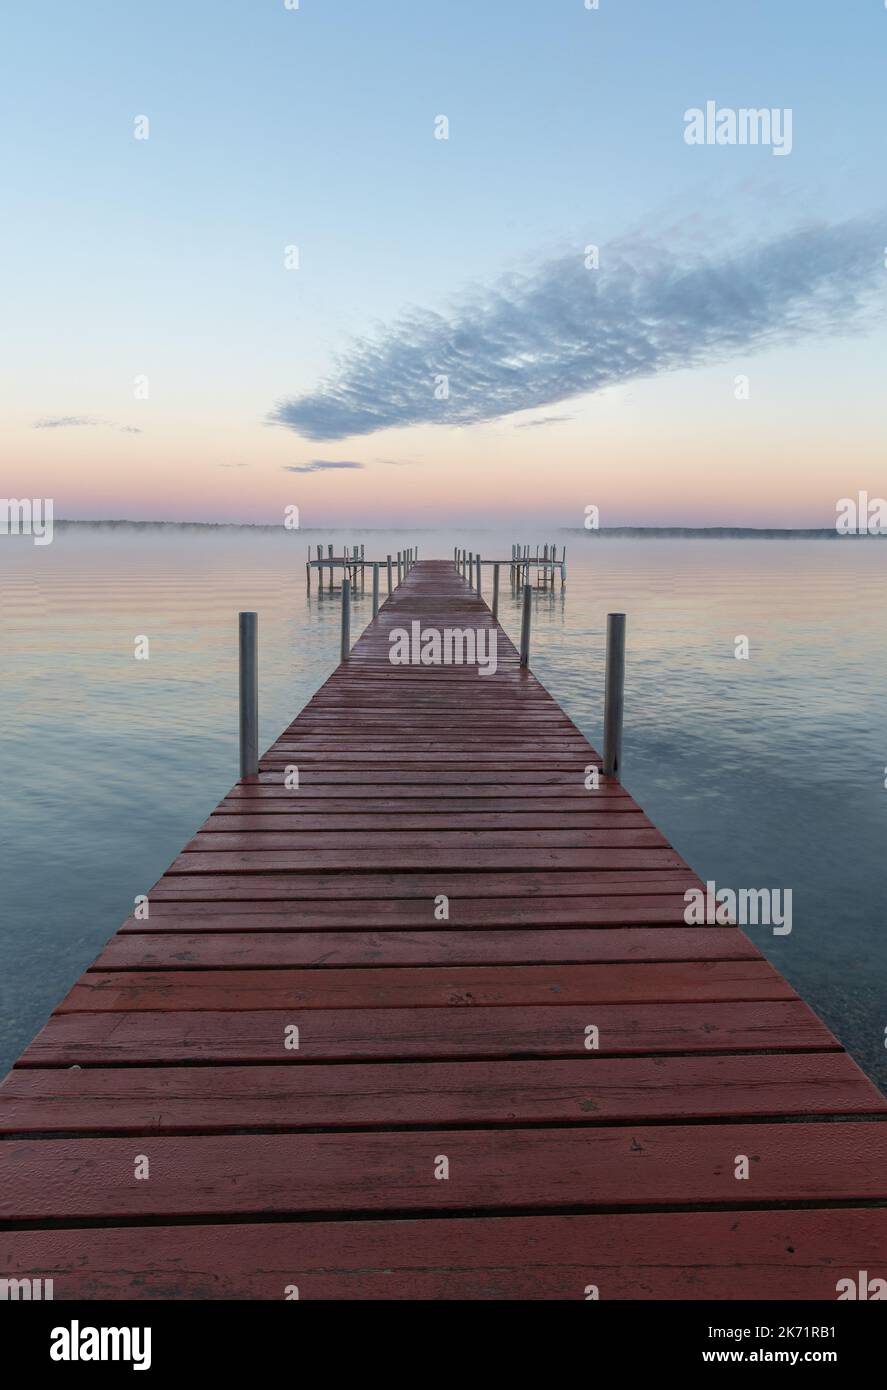 Dock leading out into a lake at sunset Stock Photo